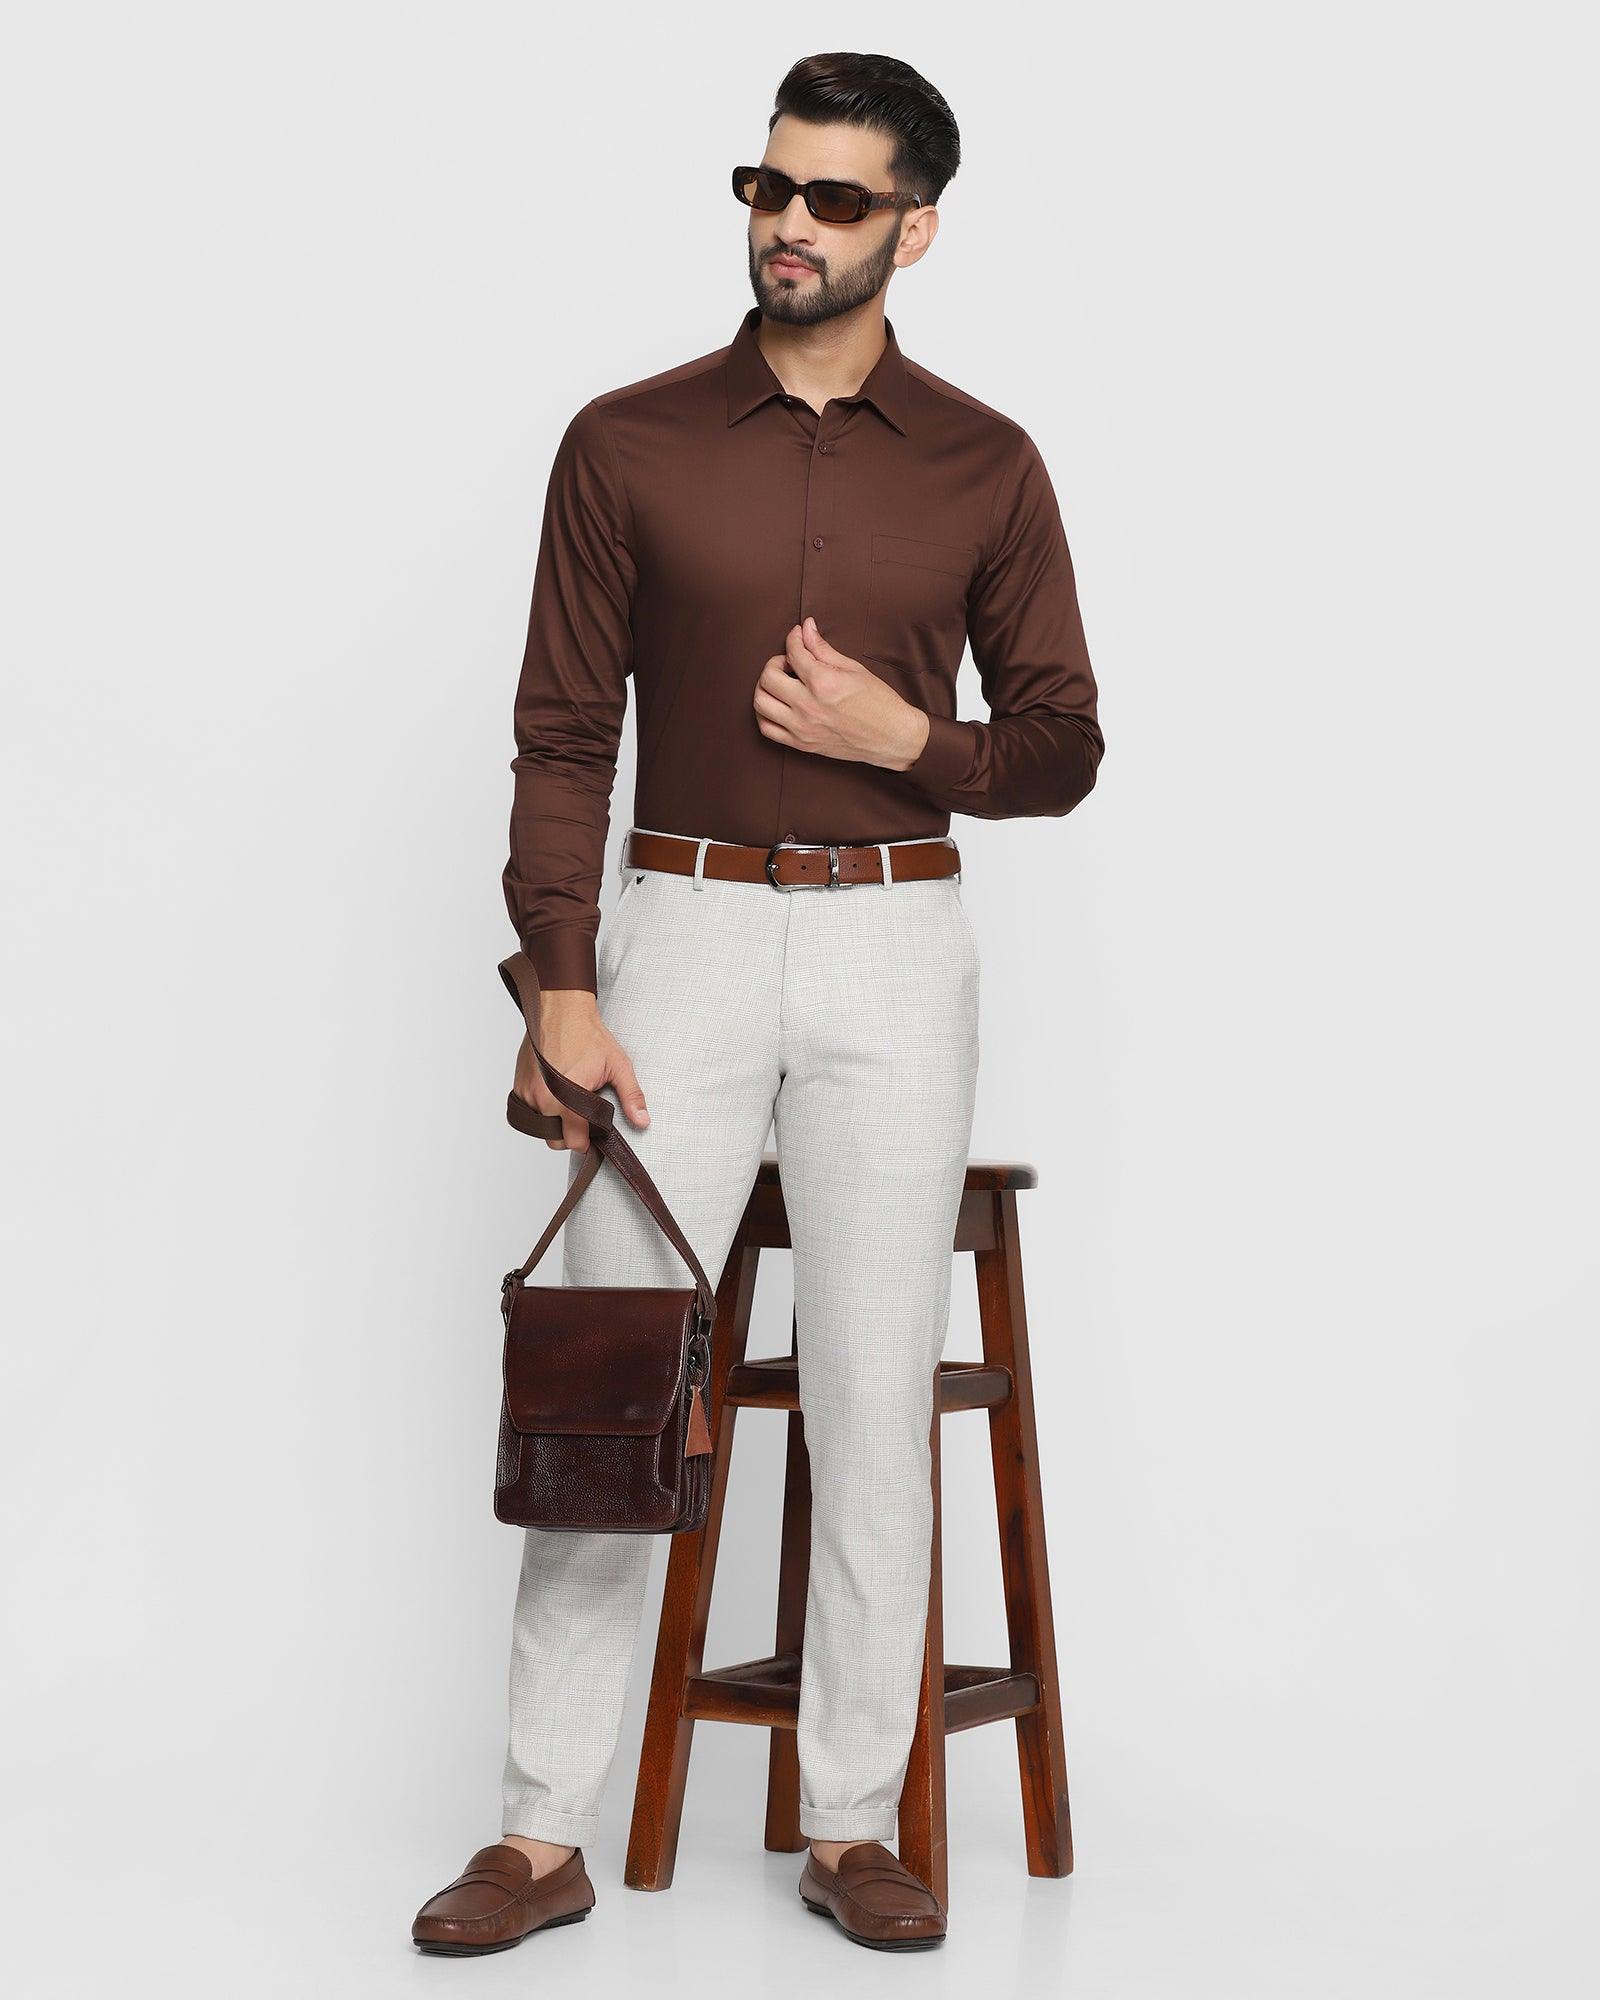 Top Mens Clothing Brand in Pakistan | Online Shopping at Uniworth